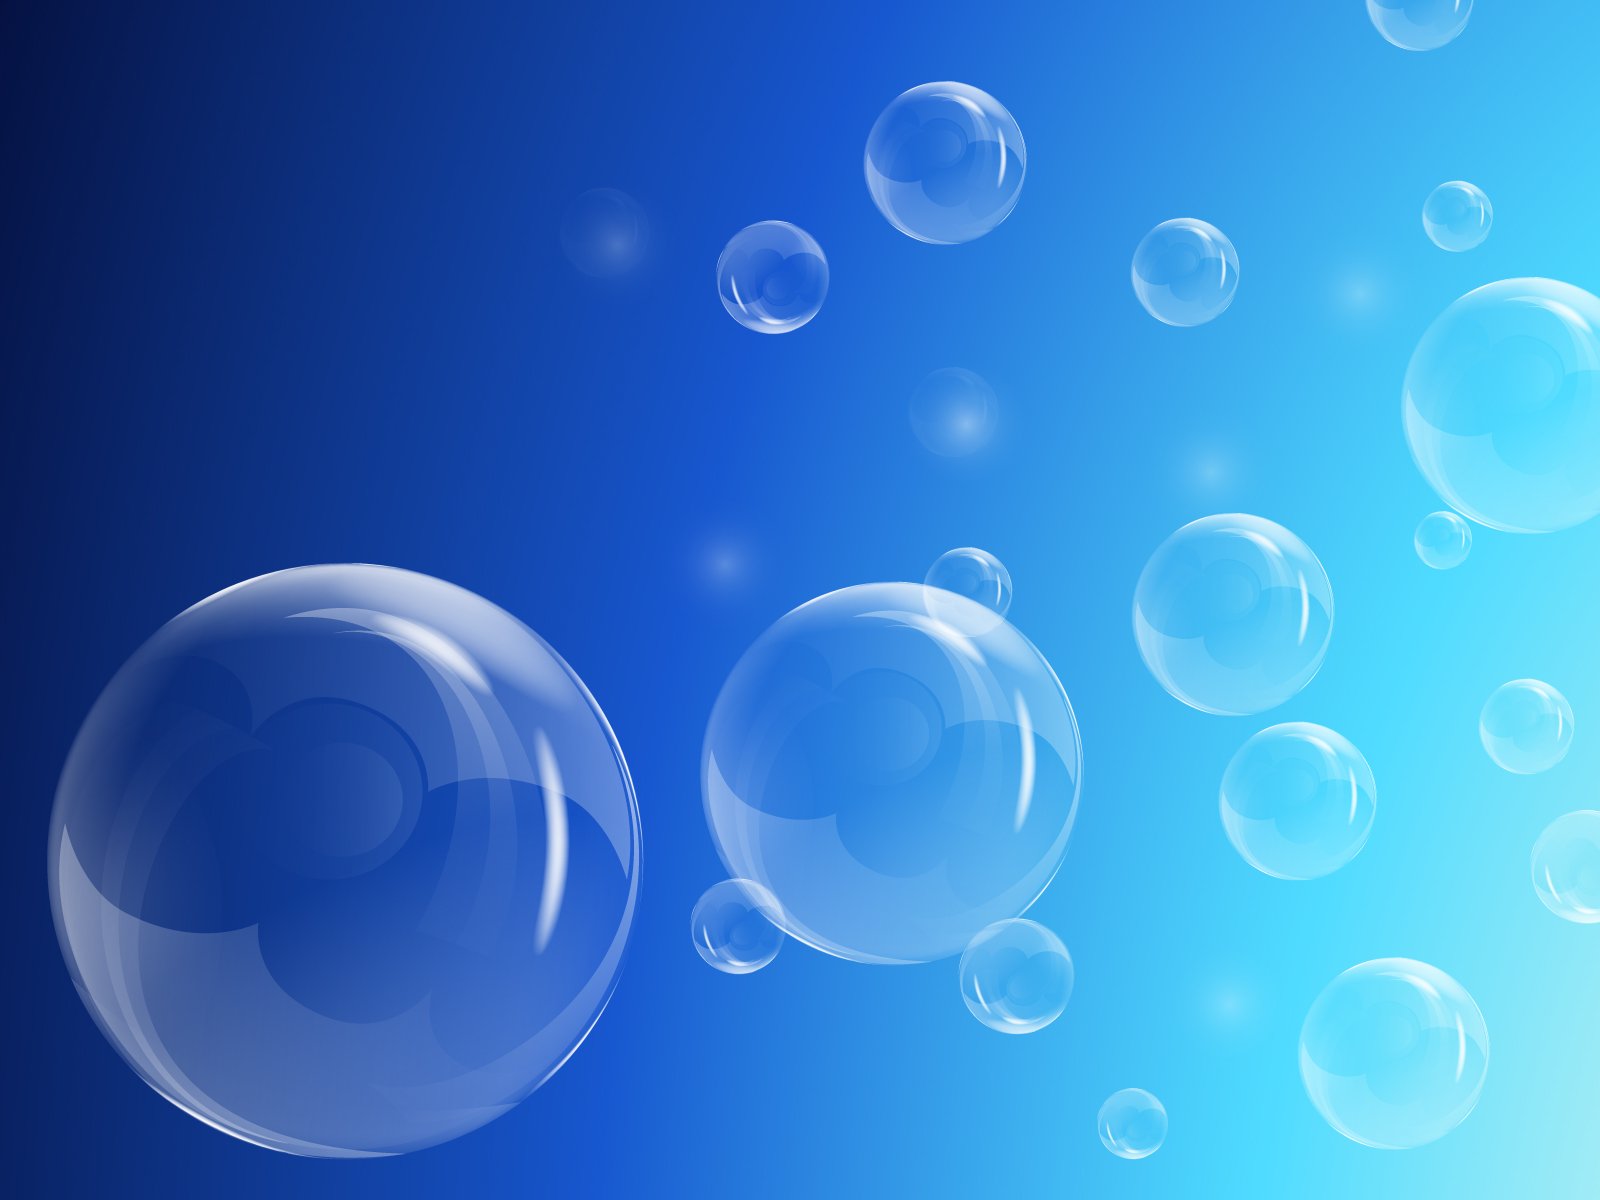  Bubbles Background Daily Pics Update HD Wallpapers Download 1600x1200